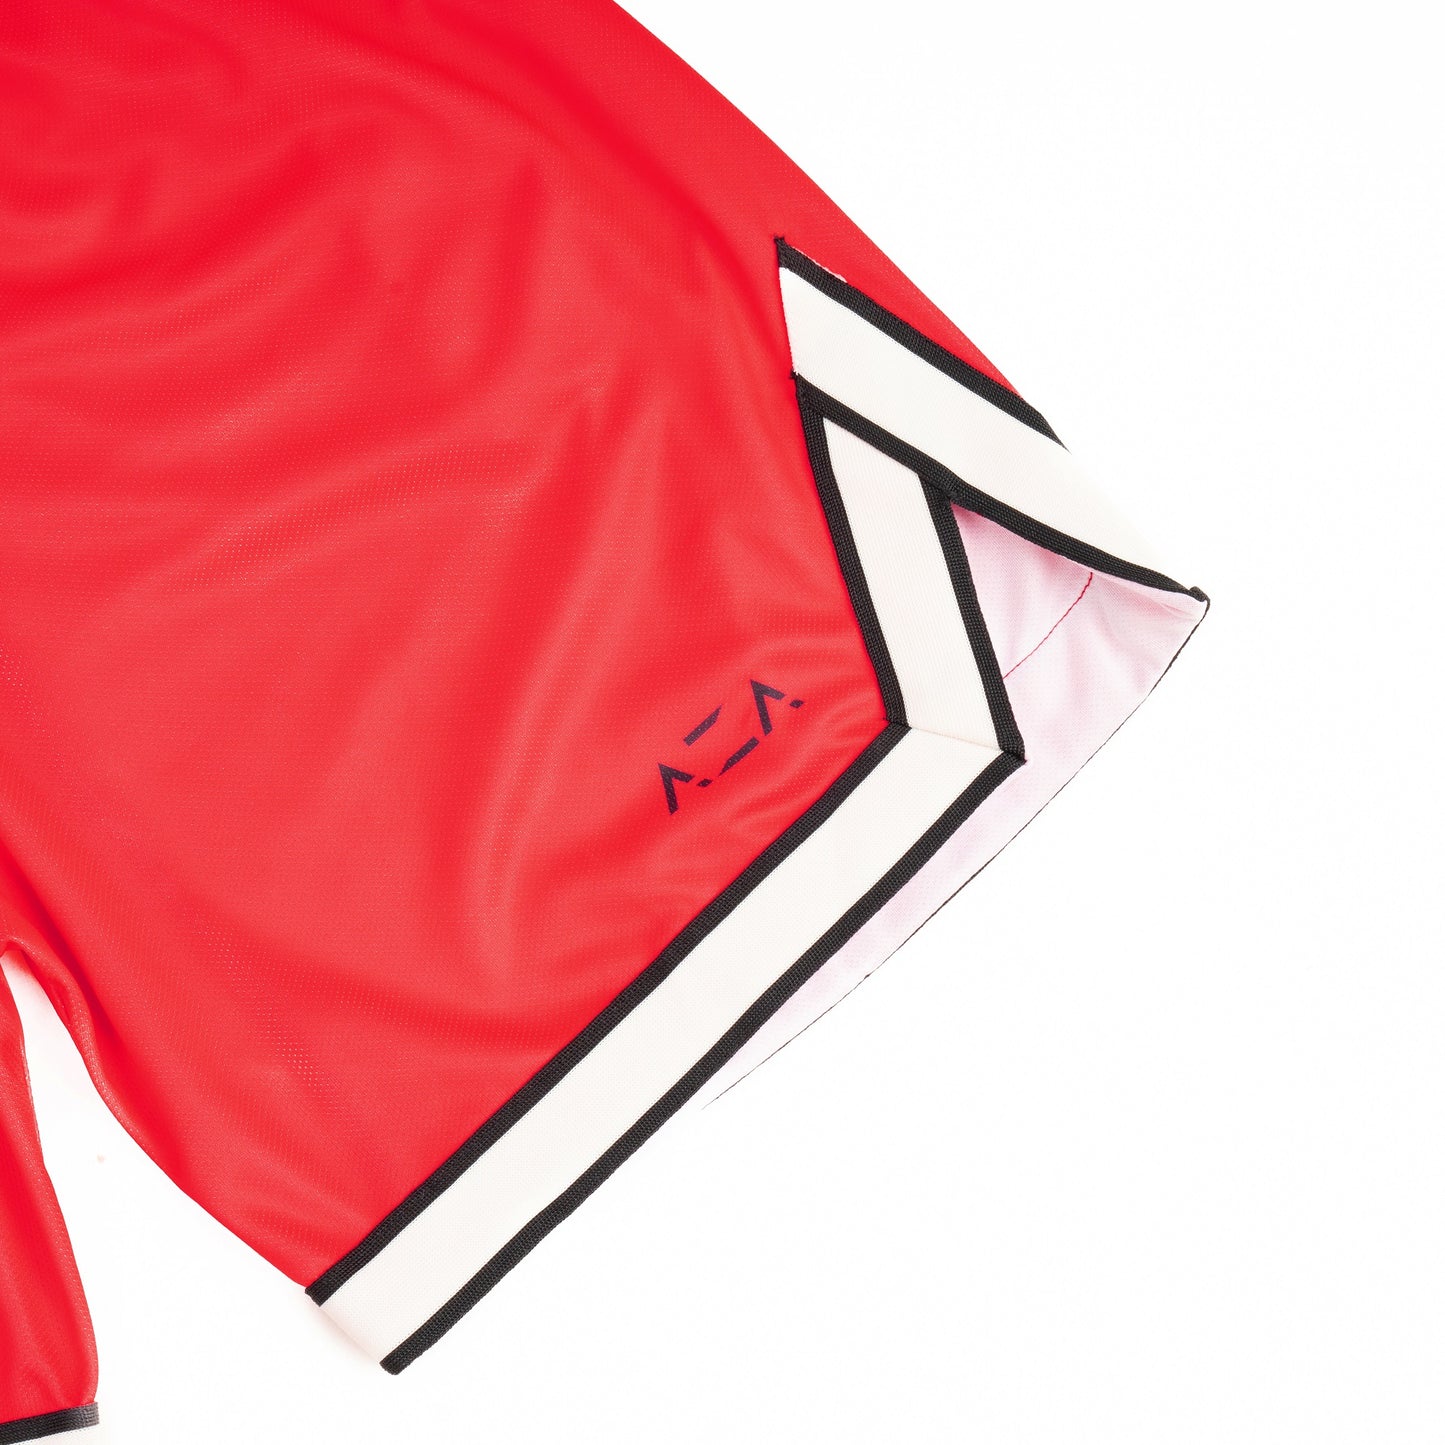 AZA Short Pants Basketball Classic Edition - Red